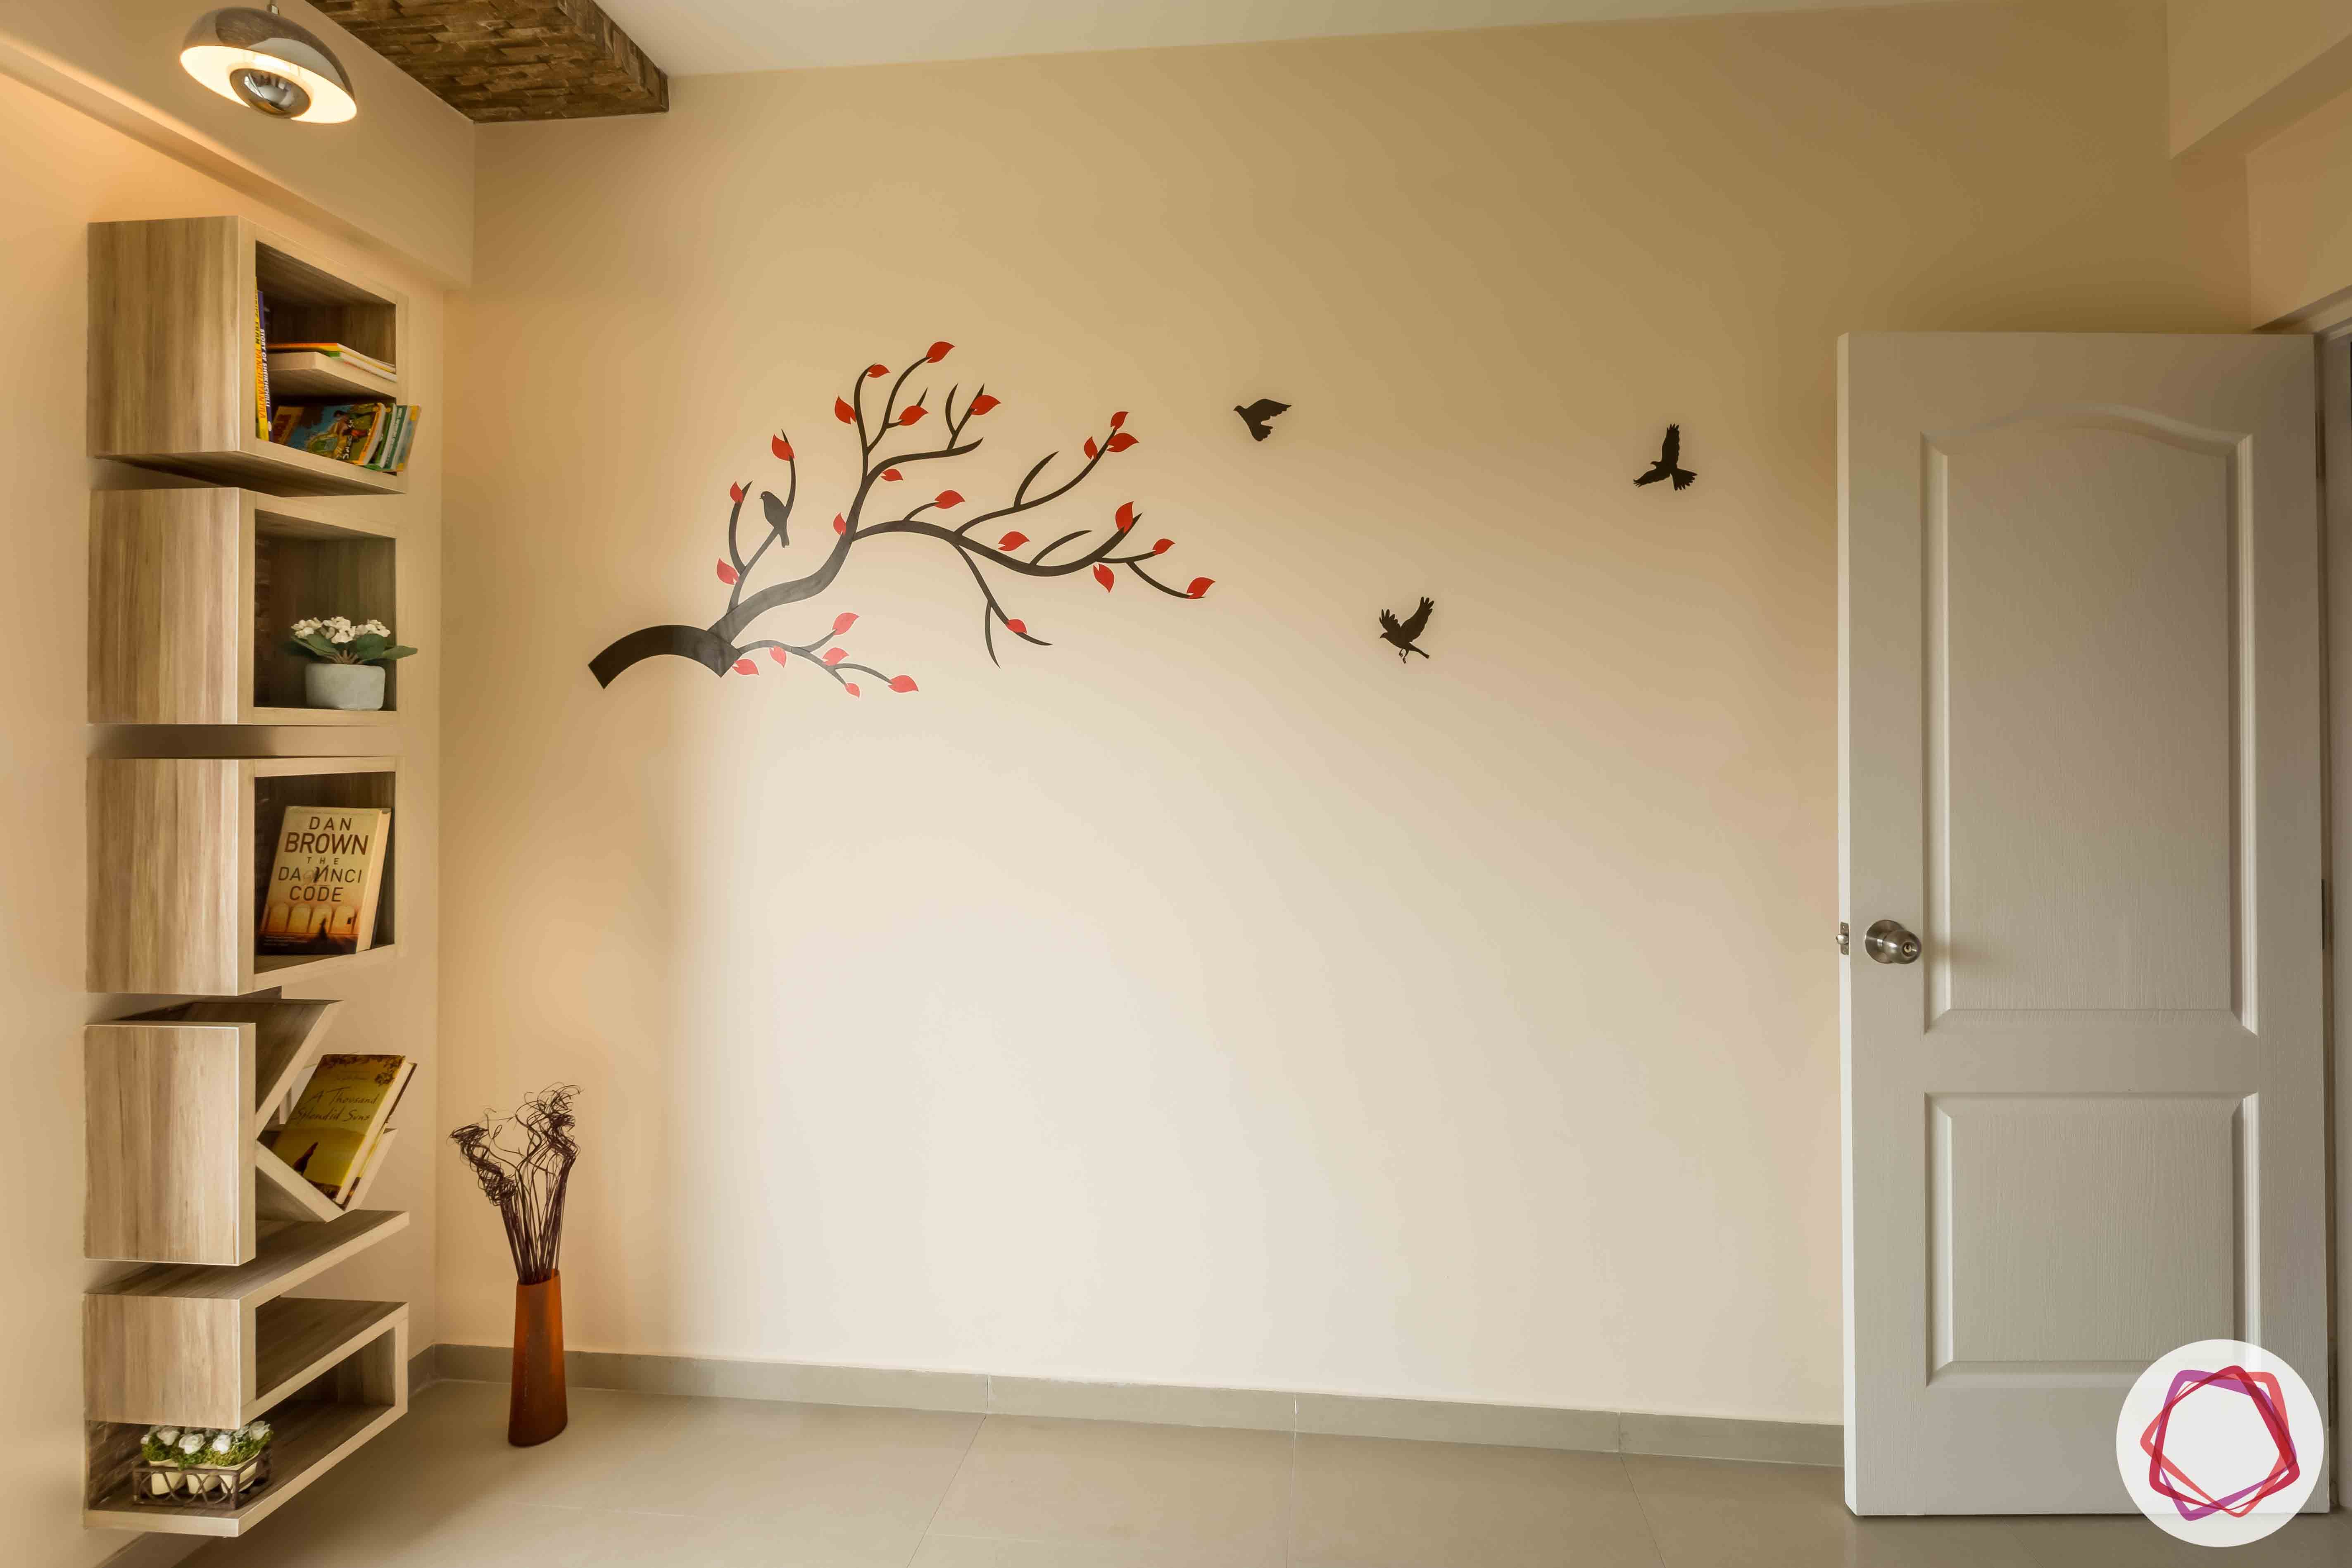 wall design-wall decal designs-decals for wall